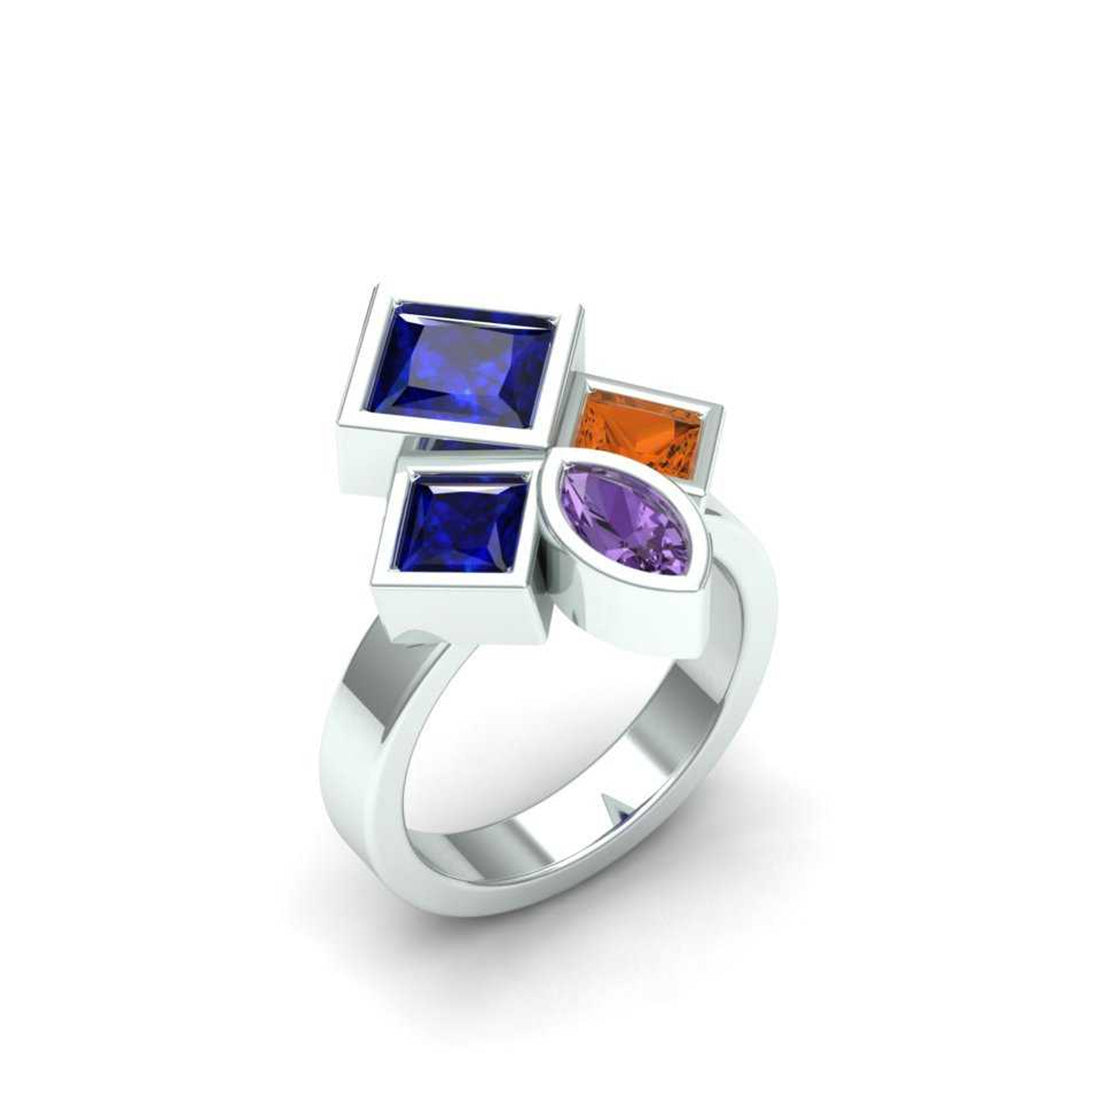 A ring designed to fit the customer's gemstones